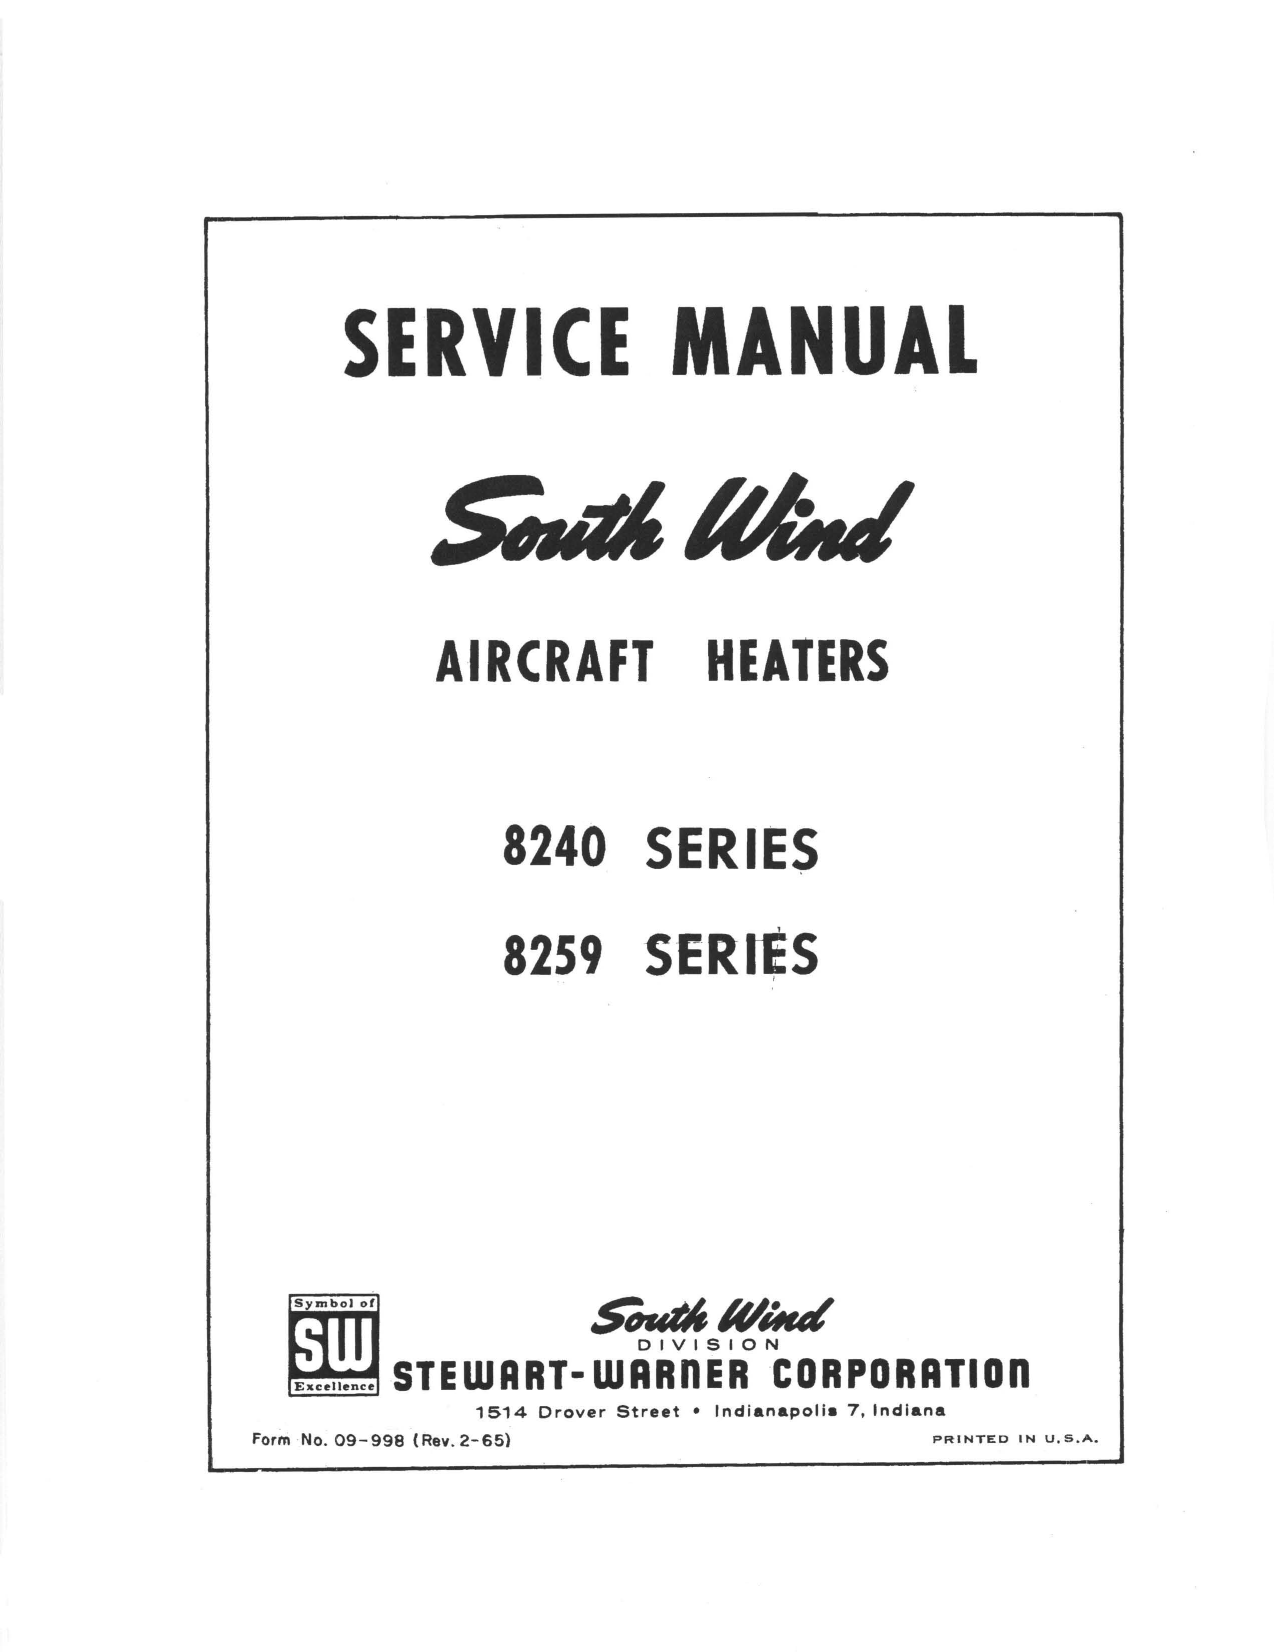 Sample page 1 from AirCorps Library document: Service Manual for South Wind Aircraft Heaters